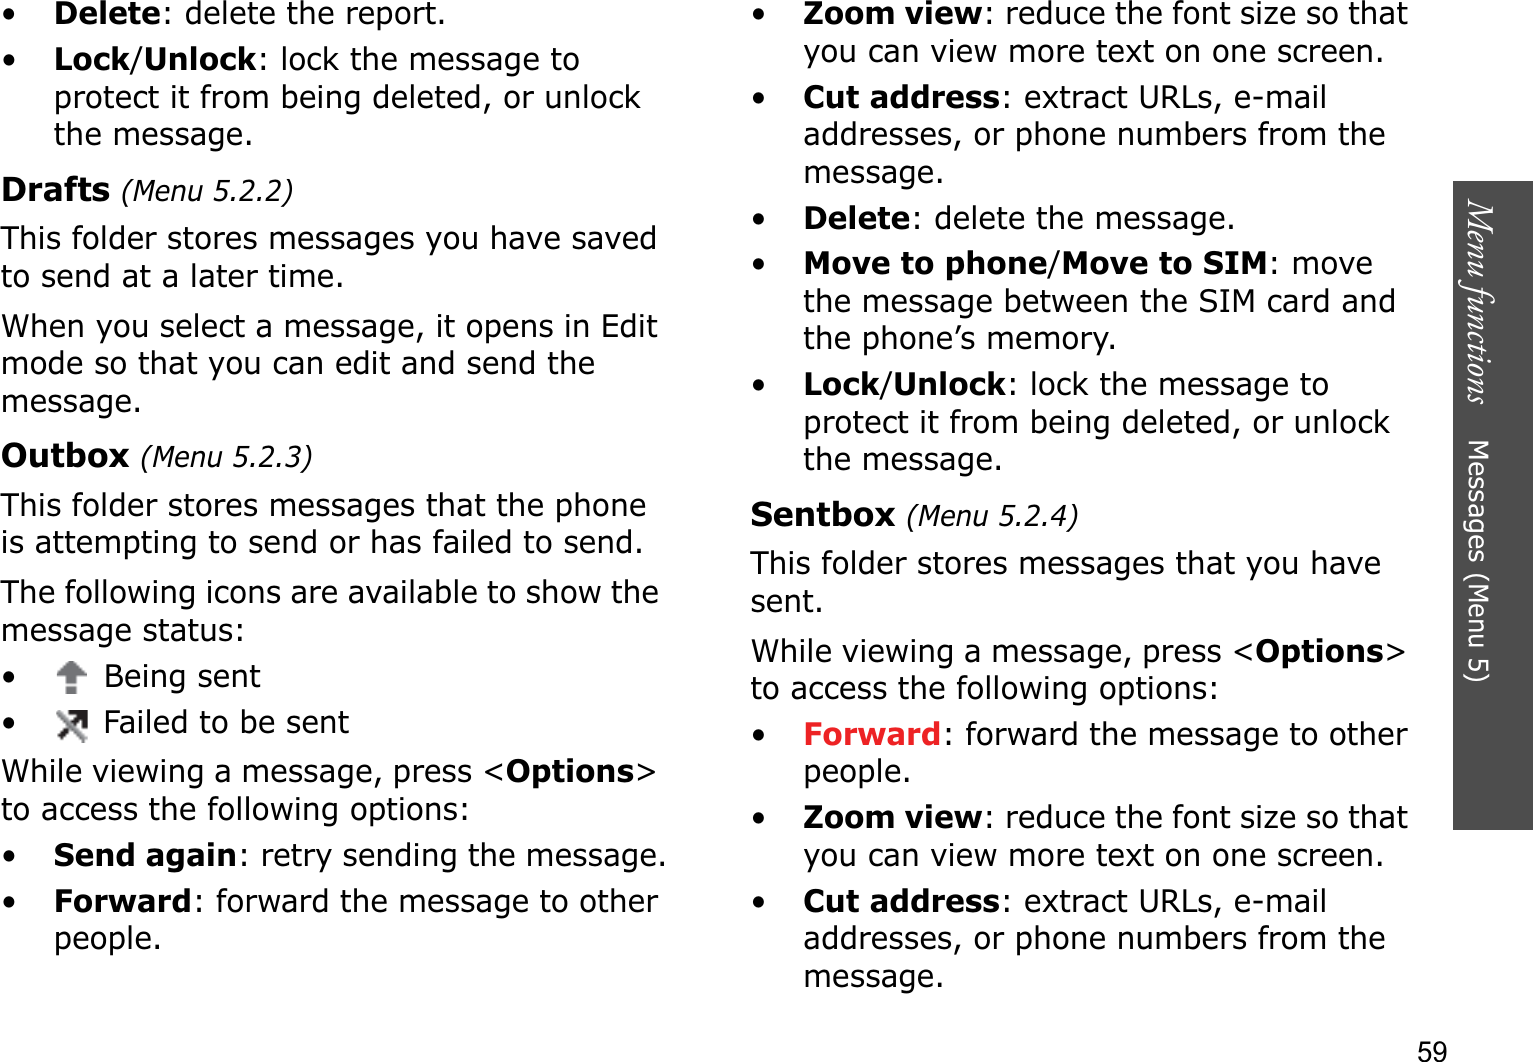 Menu functions    Messages (Menu 5)59•Delete: delete the report.•Lock/Unlock: lock the message to protect it from being deleted, or unlock the message.Drafts (Menu 5.2.2)This folder stores messages you have saved to send at a later time. When you select a message, it opens in Edit mode so that you can edit and send the message.Outbox (Menu 5.2.3)This folder stores messages that the phone is attempting to send or has failed to send.The following icons are available to show the message status:•  Being sent• Failed to be sentWhile viewing a message, press &lt;Options&gt;to access the following options:•Send again: retry sending the message.•Forward: forward the message to other people. •Zoom view: reduce the font size so that you can view more text on one screen.•Cut address: extract URLs, e-mail addresses, or phone numbers from the message.•Delete: delete the message.•Move to phone/Move to SIM: move the message between the SIM card and the phone’s memory.•Lock/Unlock: lock the message to protect it from being deleted, or unlock the message.Sentbox (Menu 5.2.4)This folder stores messages that you have sent.While viewing a message, press &lt;Options&gt;to access the following options:•Forward: forward the message to other people. •Zoom view: reduce the font size so that you can view more text on one screen.•Cut address: extract URLs, e-mail addresses, or phone numbers from the message.